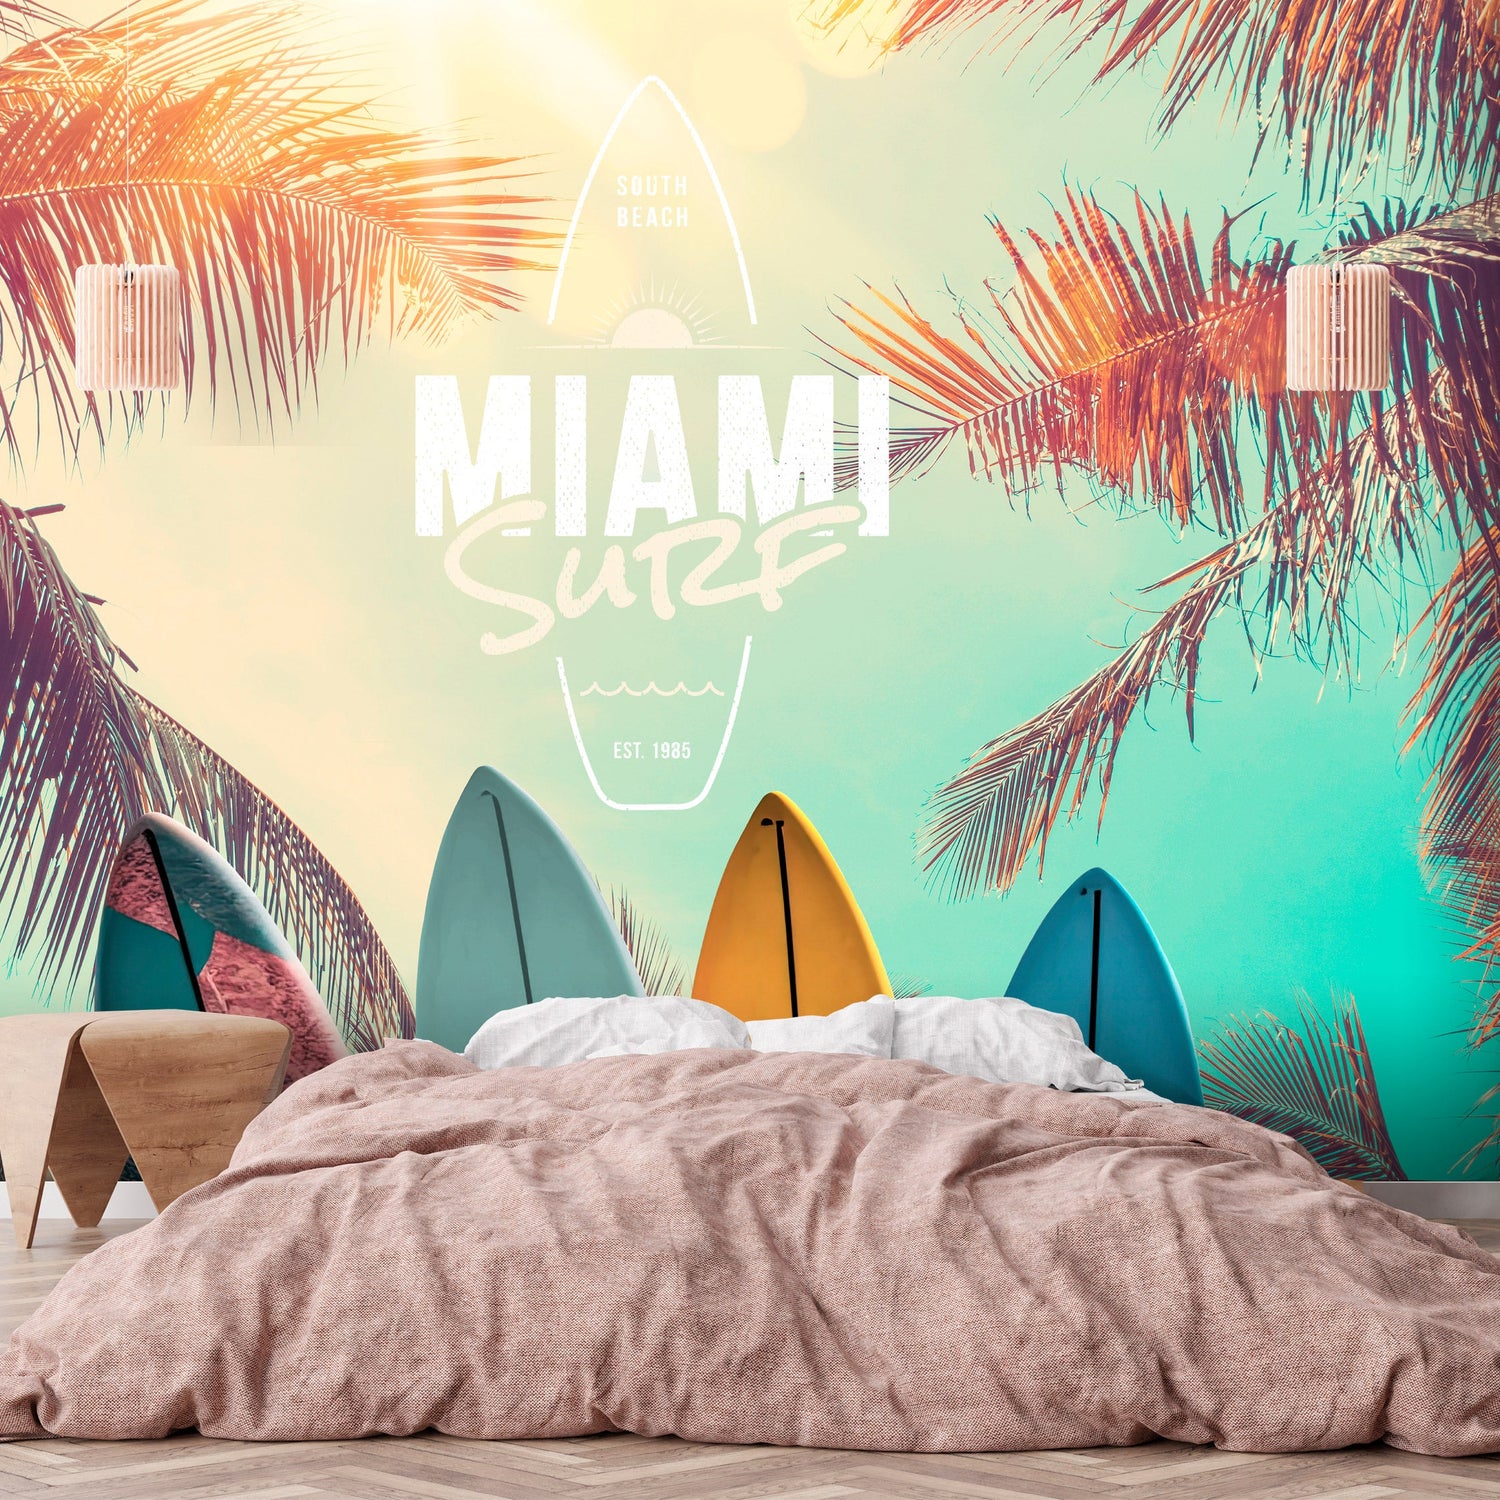 Peel & Stick Tropical Wall Mural - South Beach Miami Surf - Removable Wall Decals-Tiptophomedecor